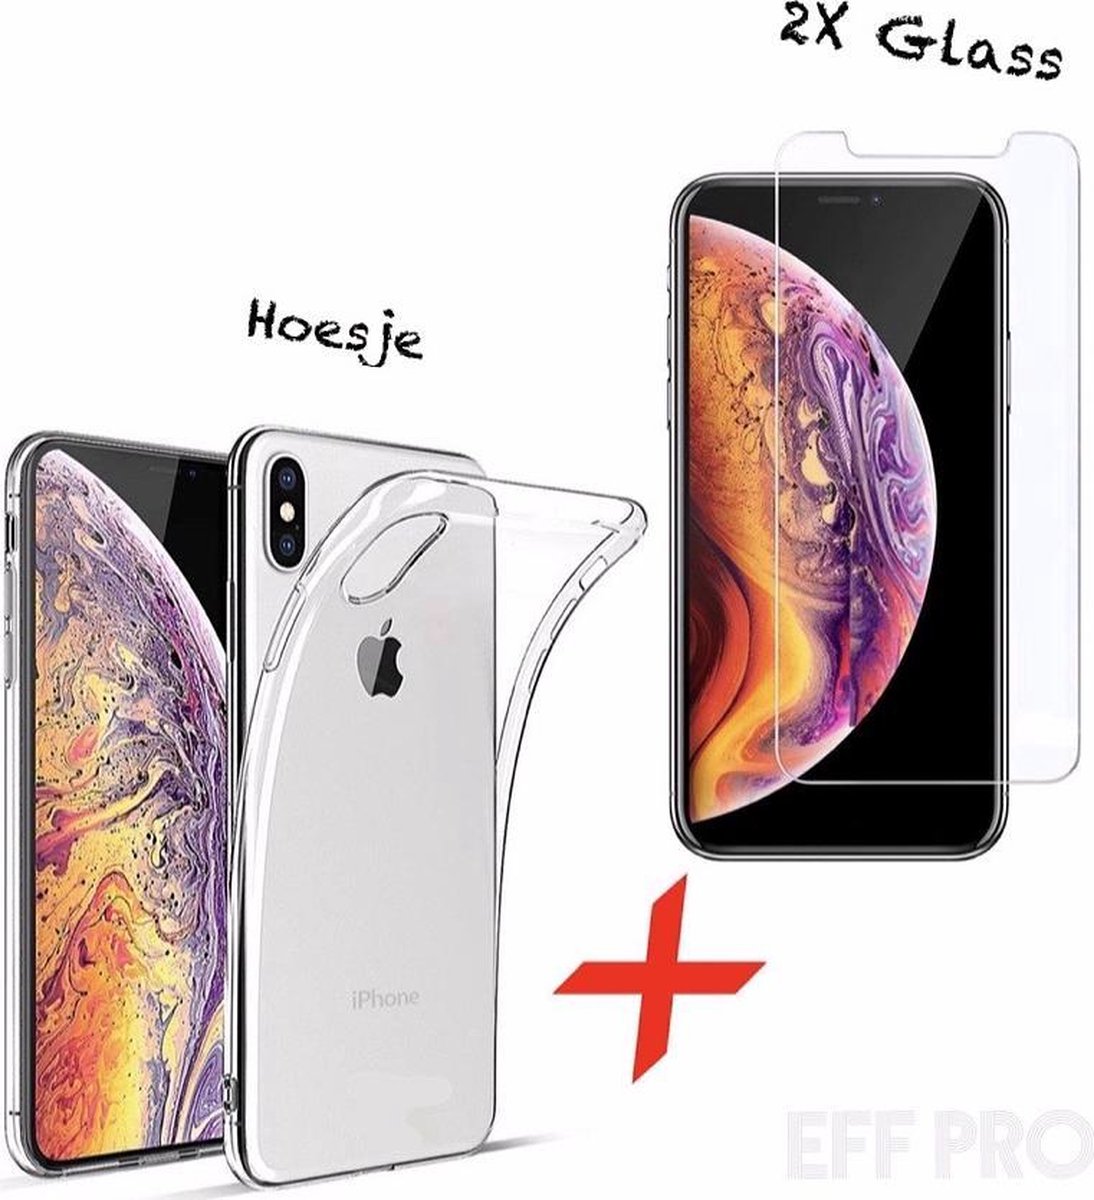 iPhone XS Max Hoesje Transparant (Siliconen TPU Soft Case) + 2Pcs Screenprotector Tempered Glass - Eff Pro